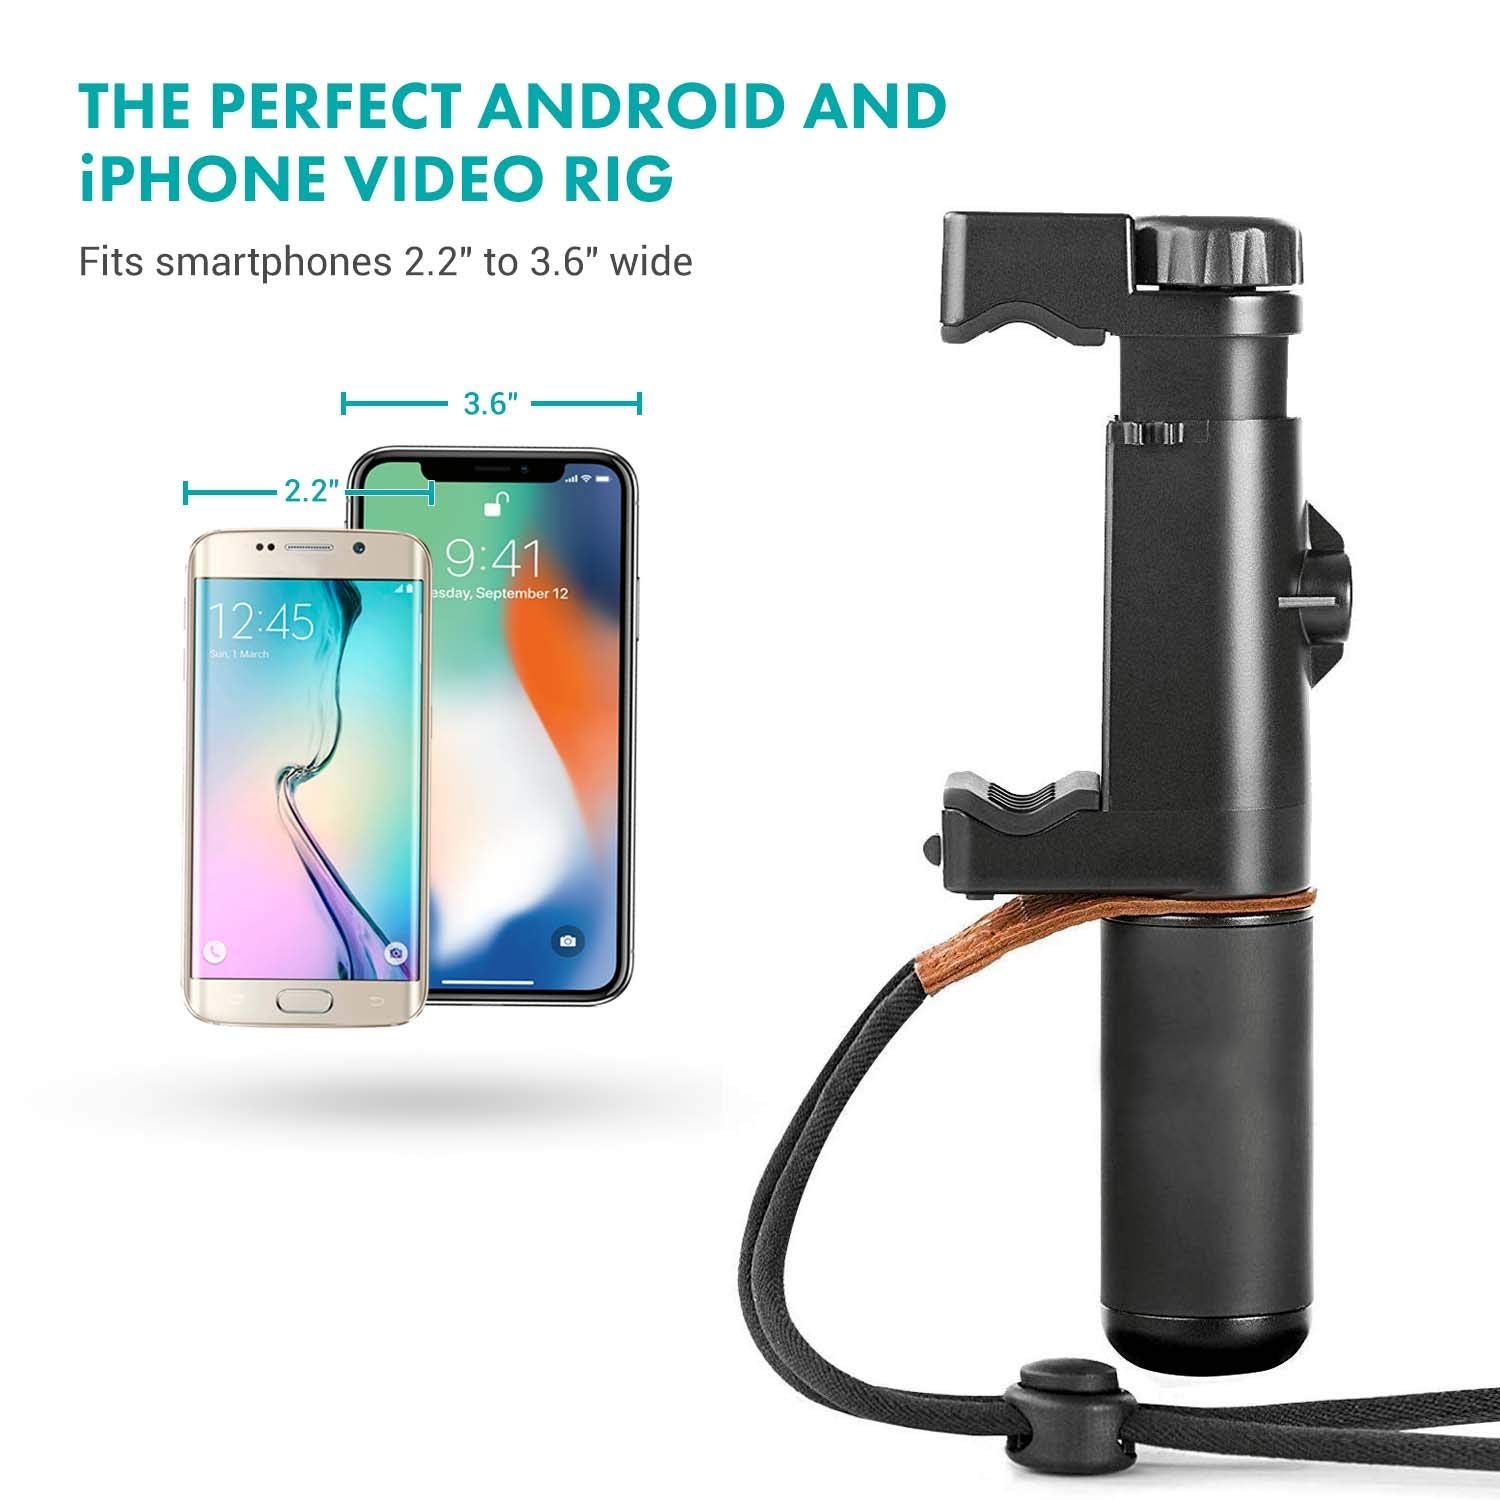 Movo Smartphone Video Kit V1 Vlogging Kit with Grip Rig, Shotgun Microphone, LED Light and Wireless Remote - YouTube Equipment Compatible with iPhone, Android Samsung Galaxy, Note - Vlogging Equipment  - Good